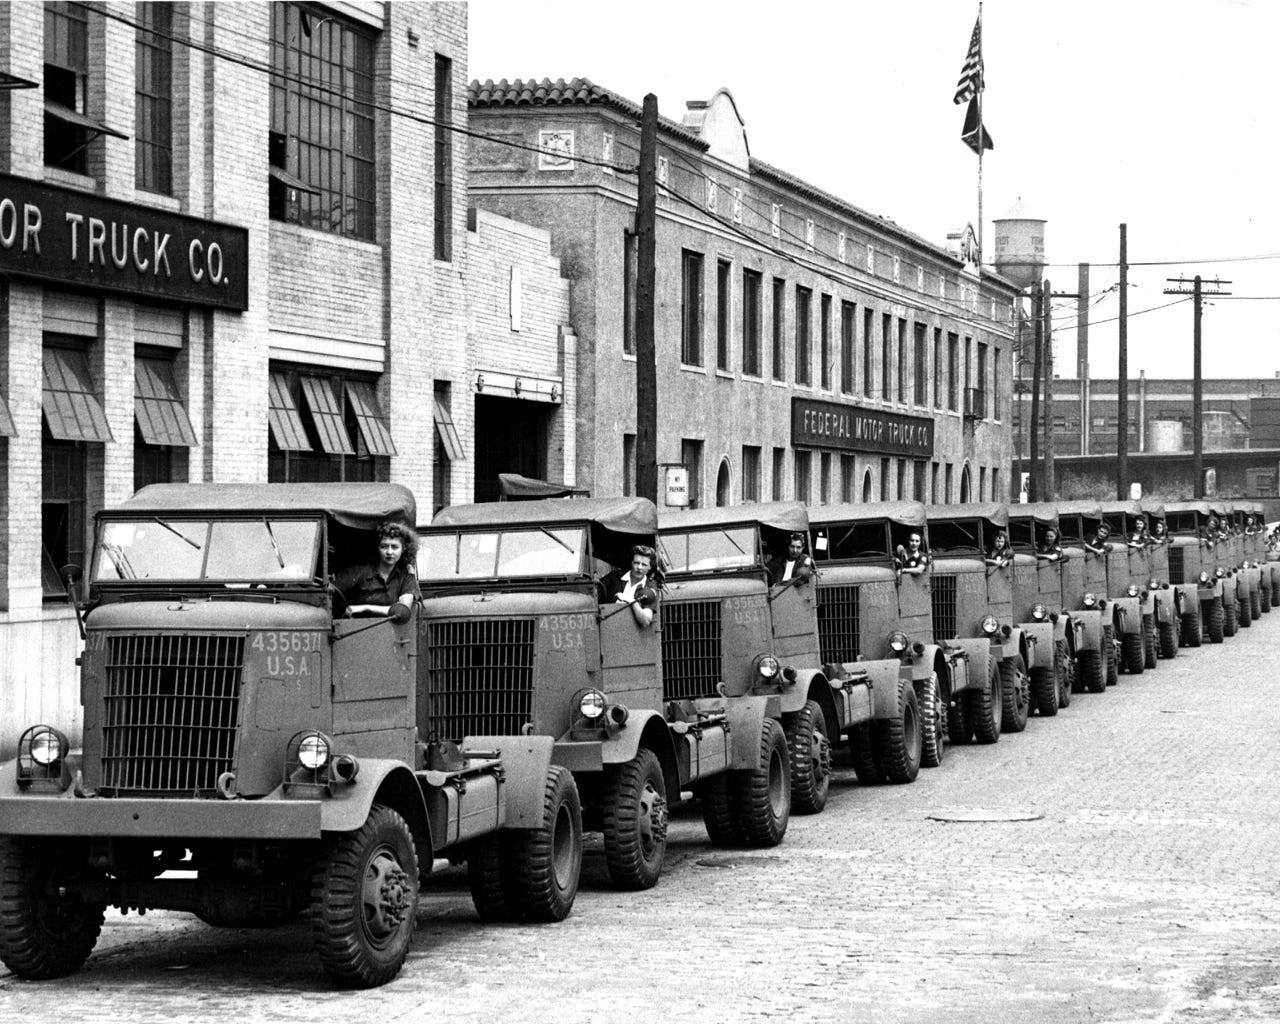 Women Army ordinance workers driving Federal war trucks in Michigan, August 1942.